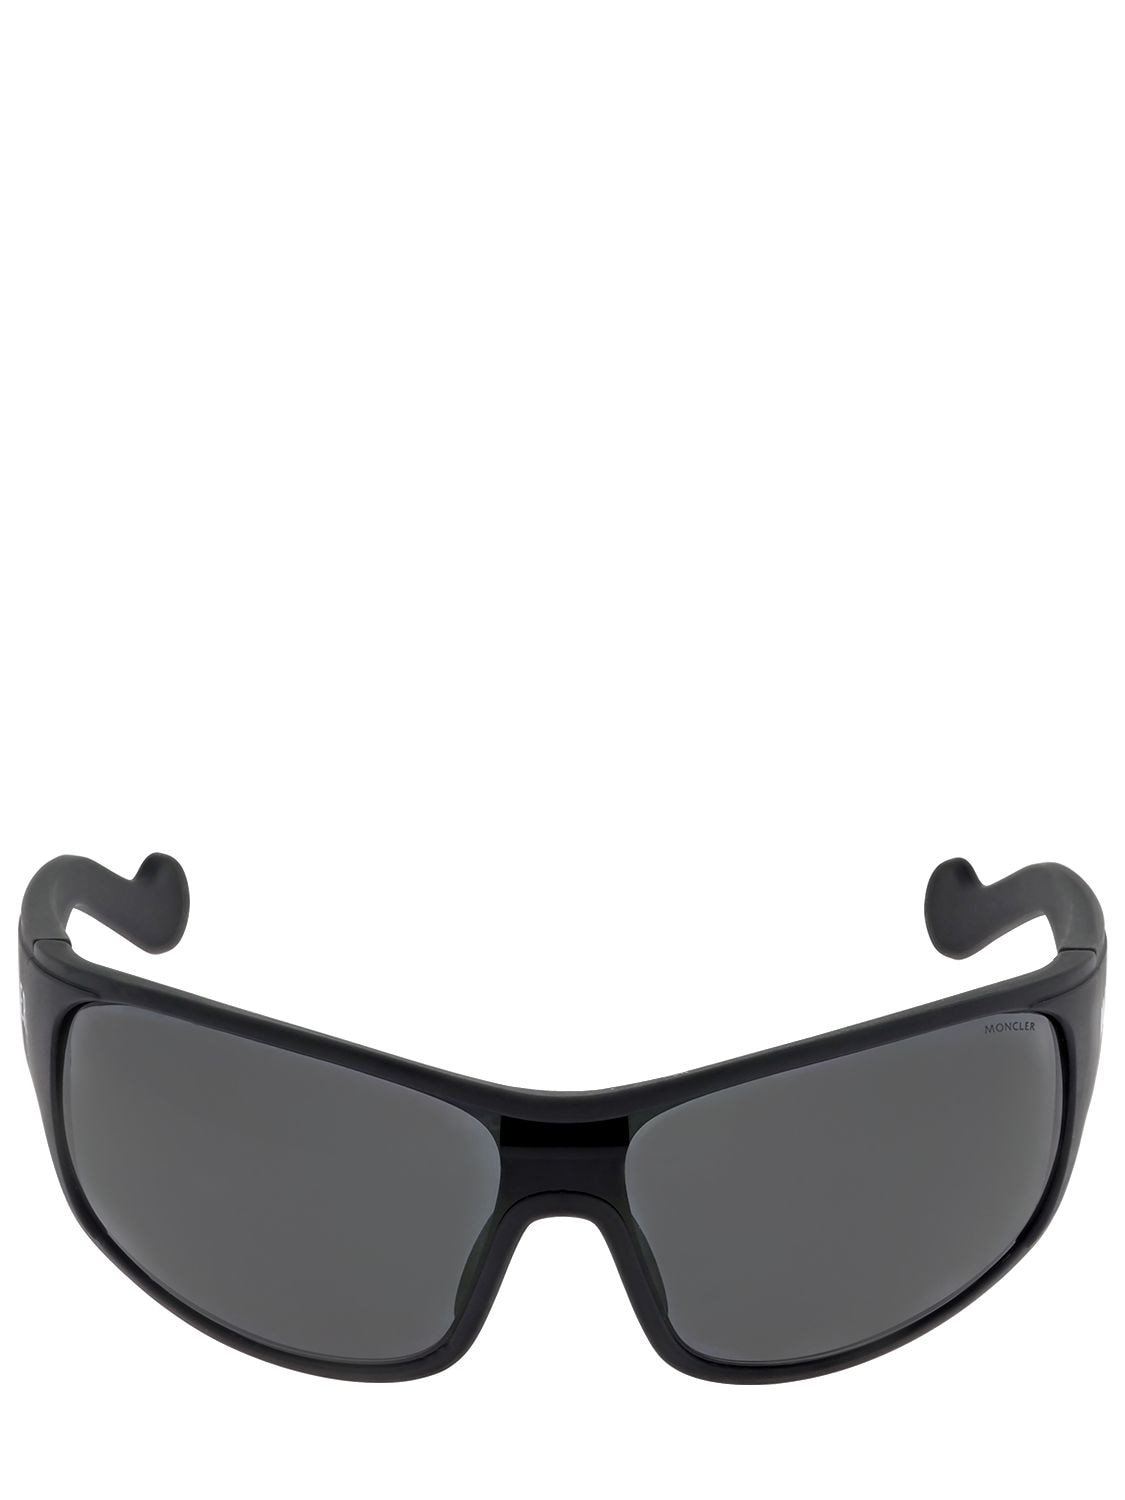 Alyx 9sm Co-lab Injected Sunglasses